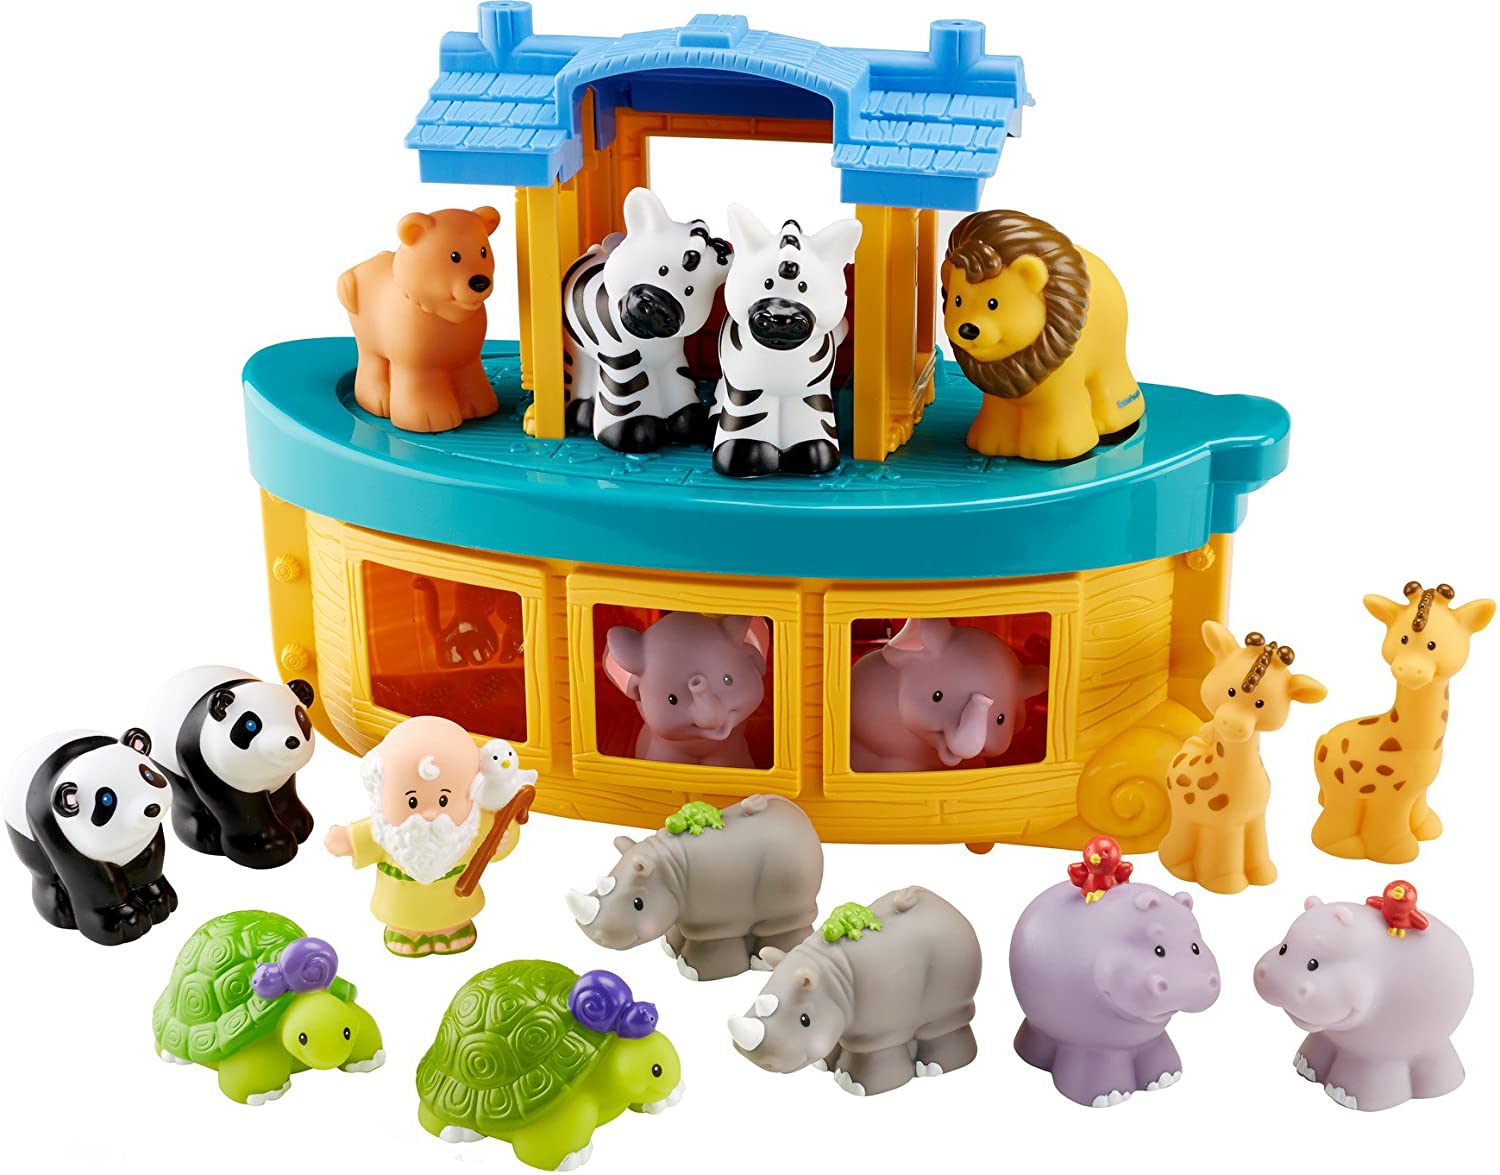 Noah's Ark by Fisher Price